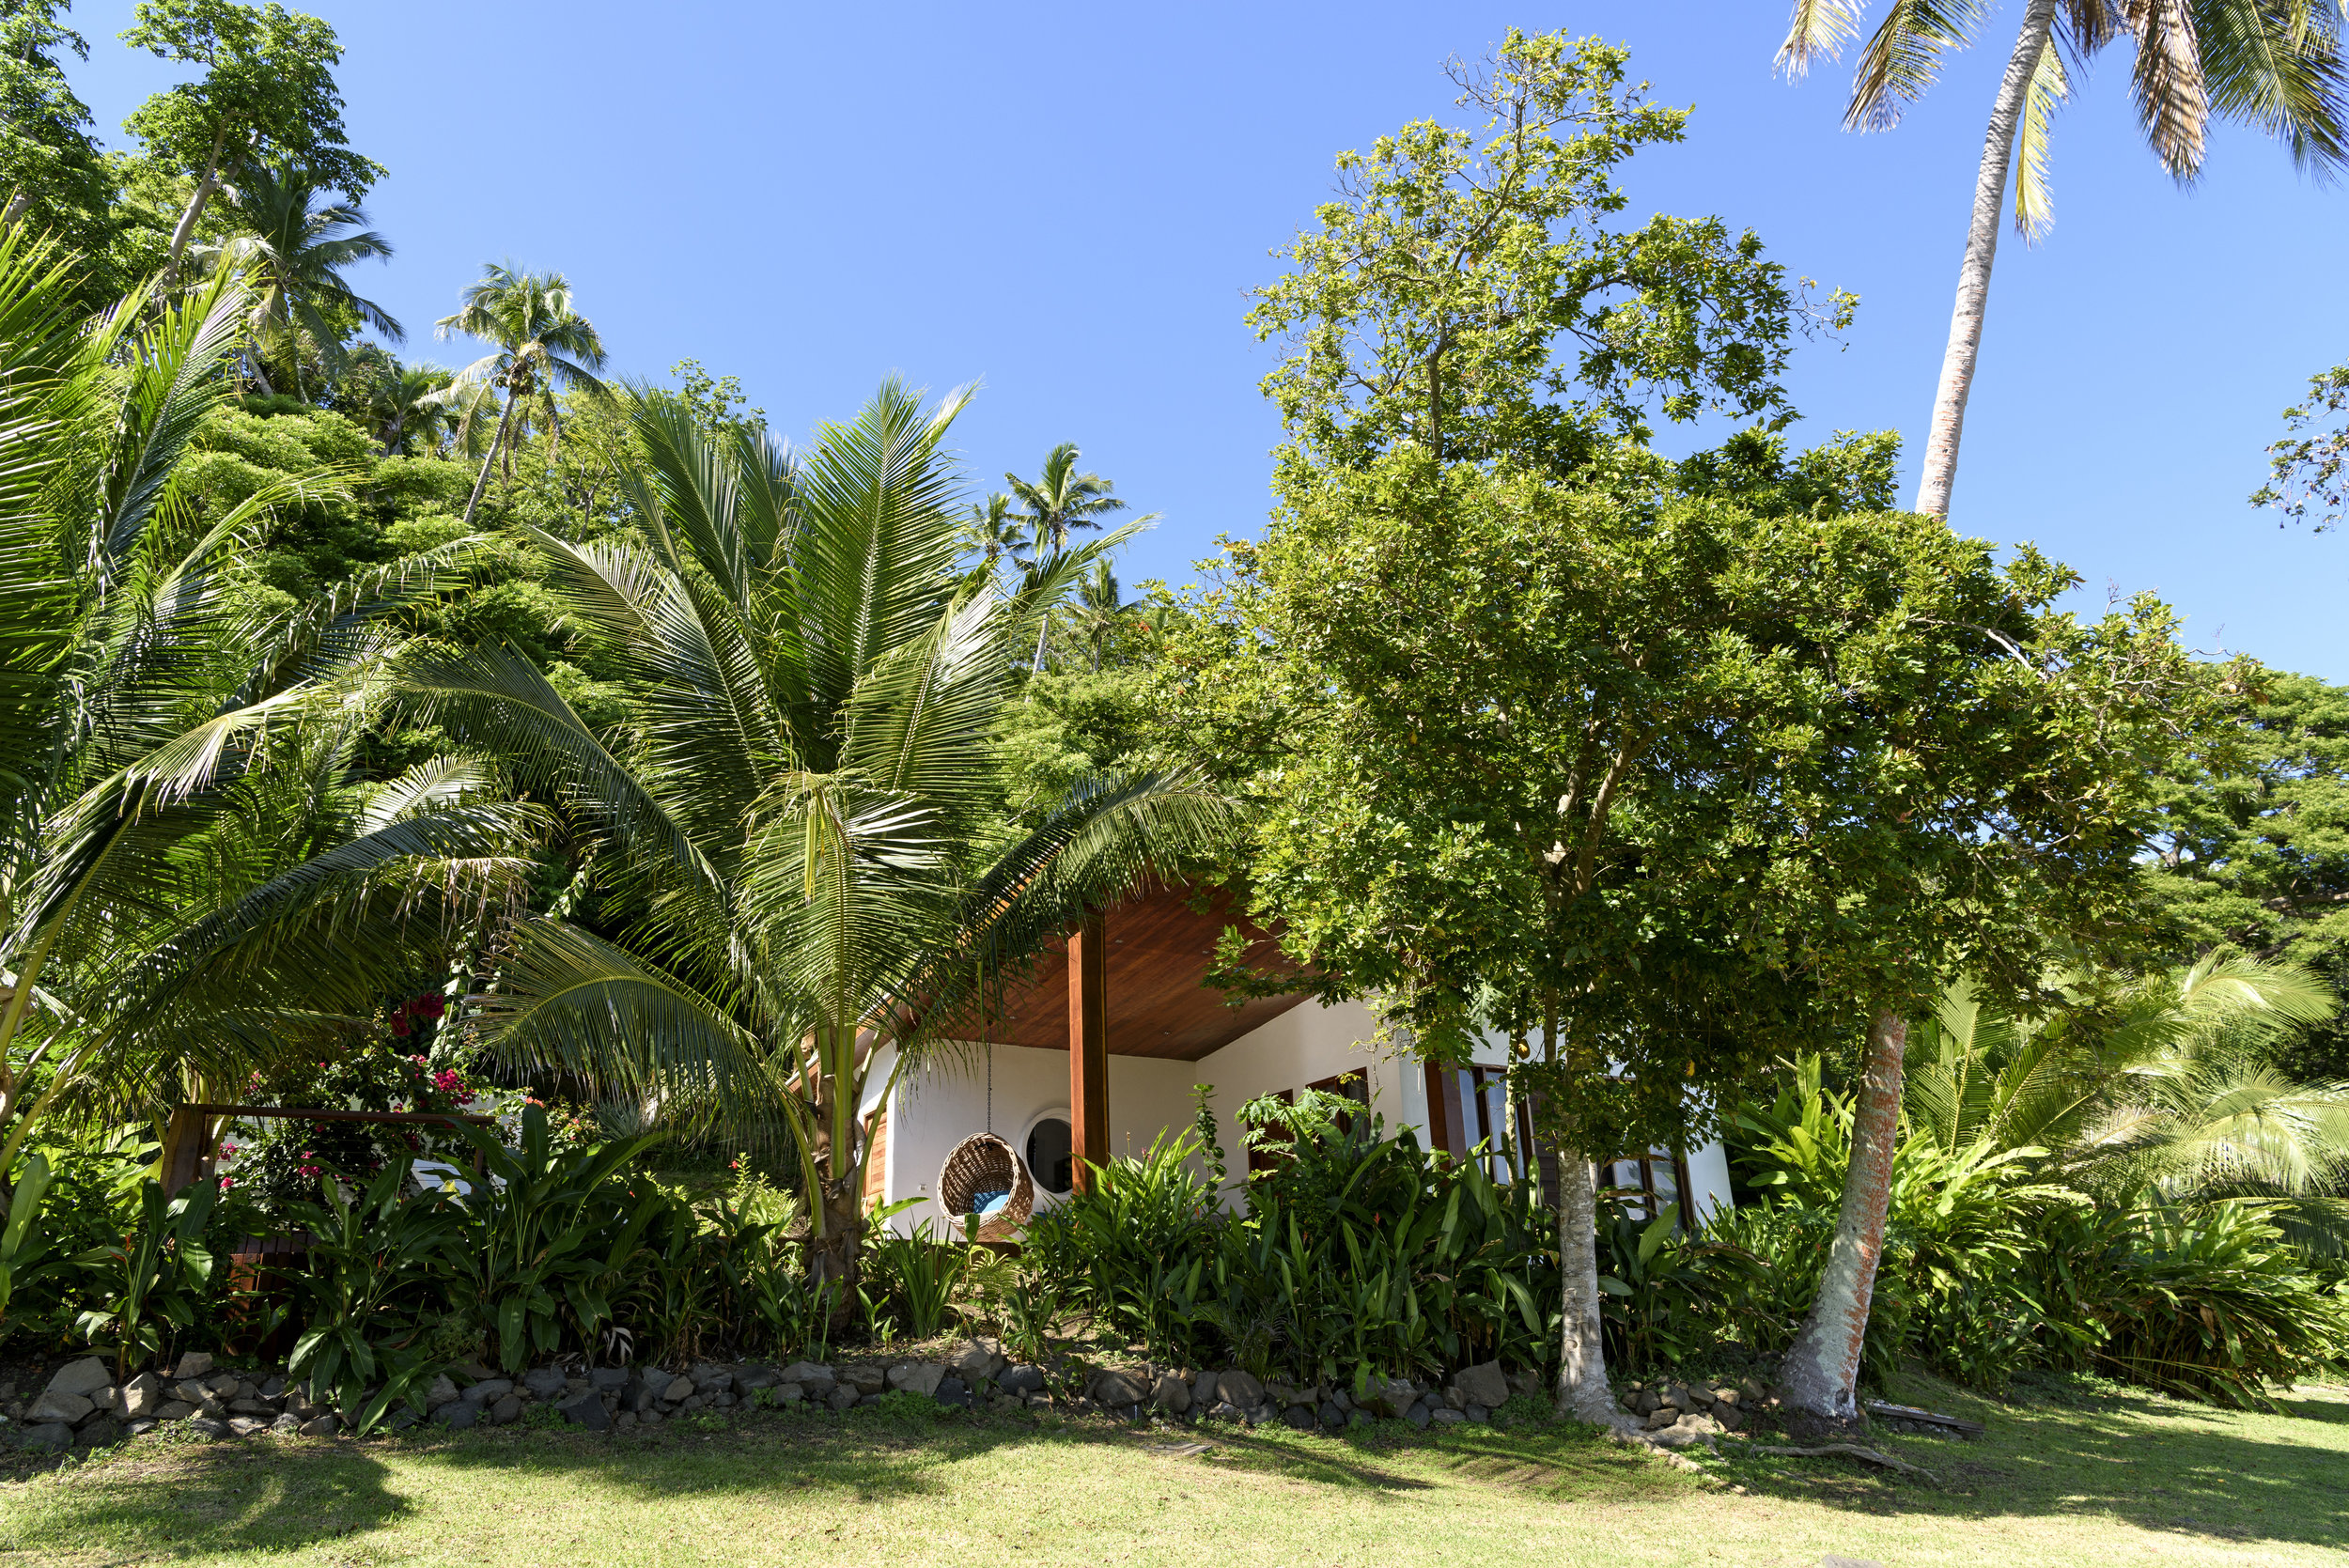 Royal Retreat surrounded by lush tropical landscape for privacy, The Remote Resort Fiji Islands